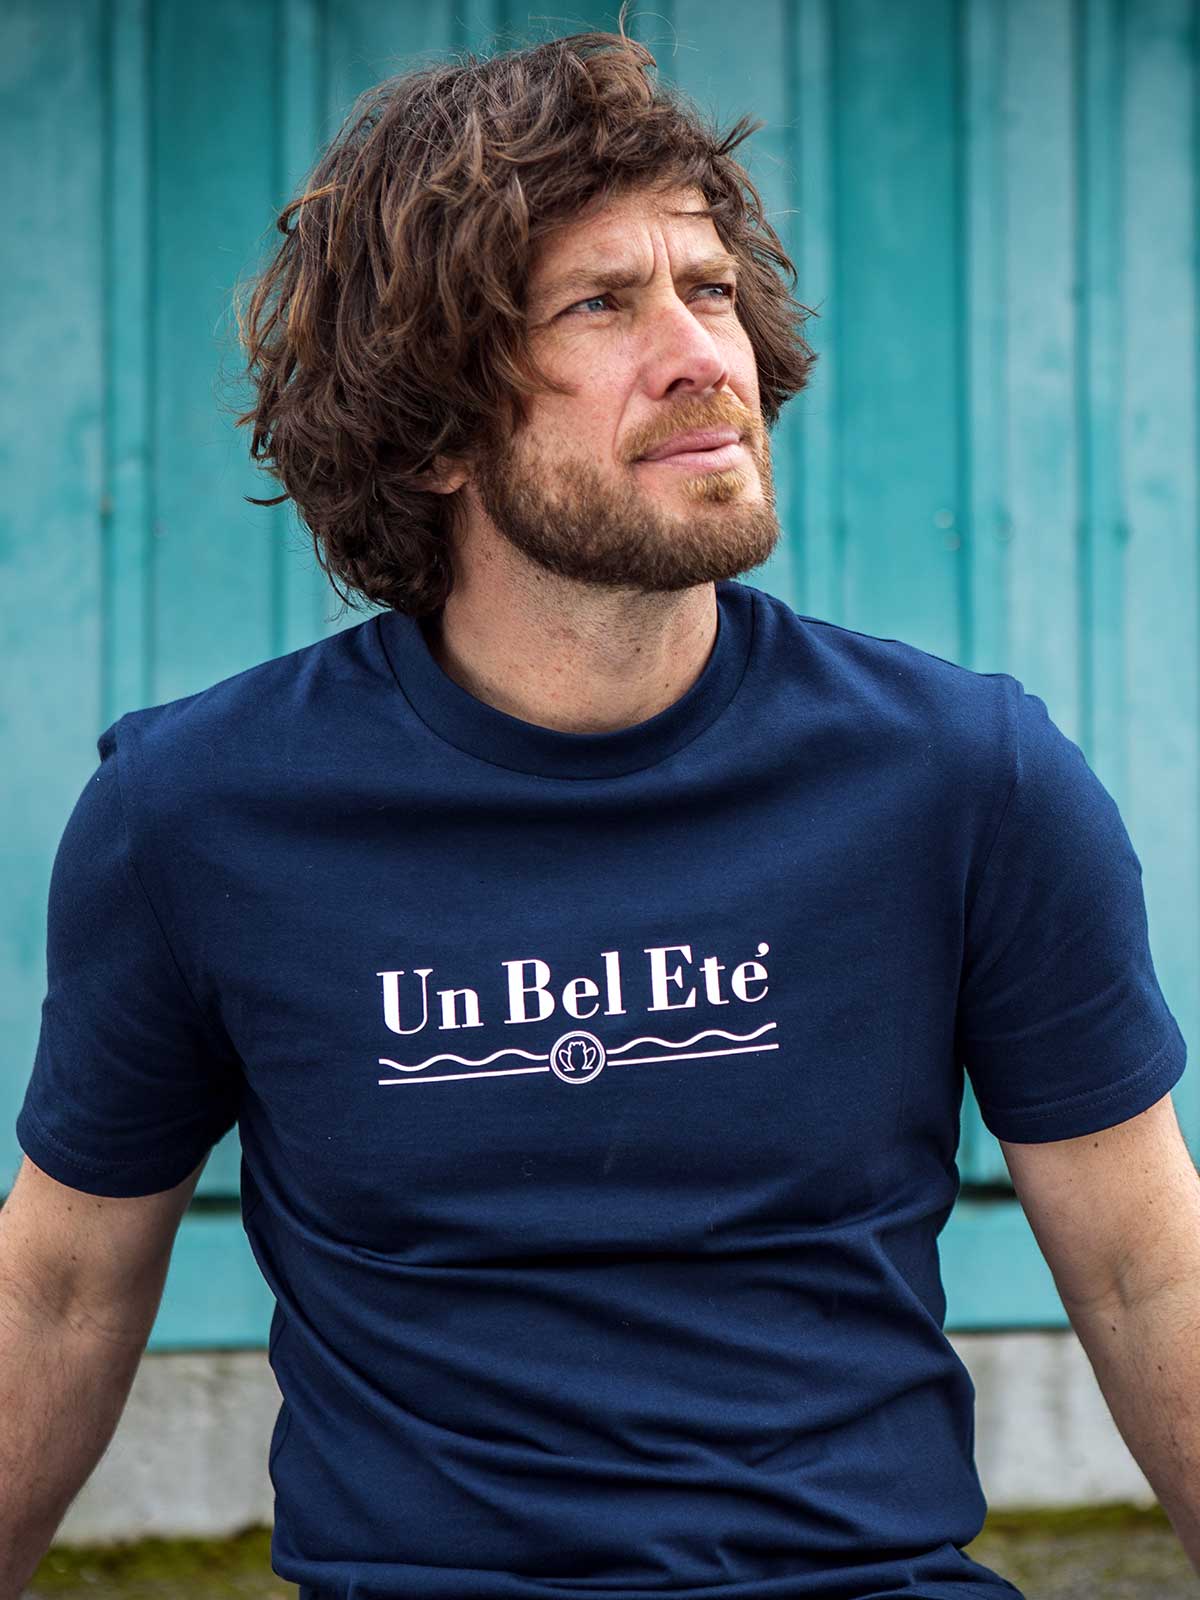 t-shirt-homme-made-in-france-un-bel-ete-2022-3